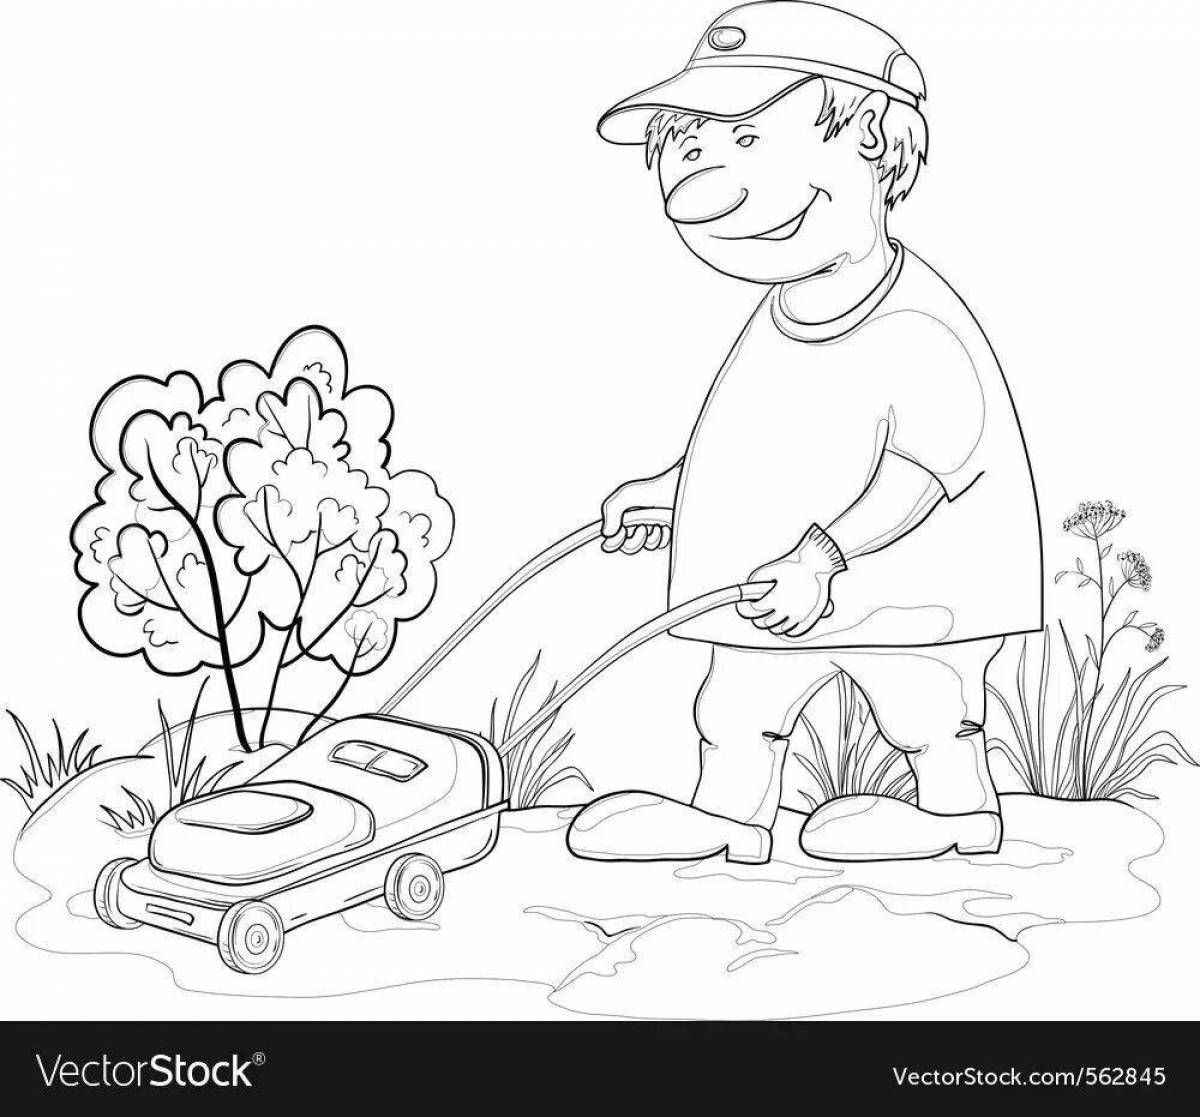 Tempting lawn coloring page